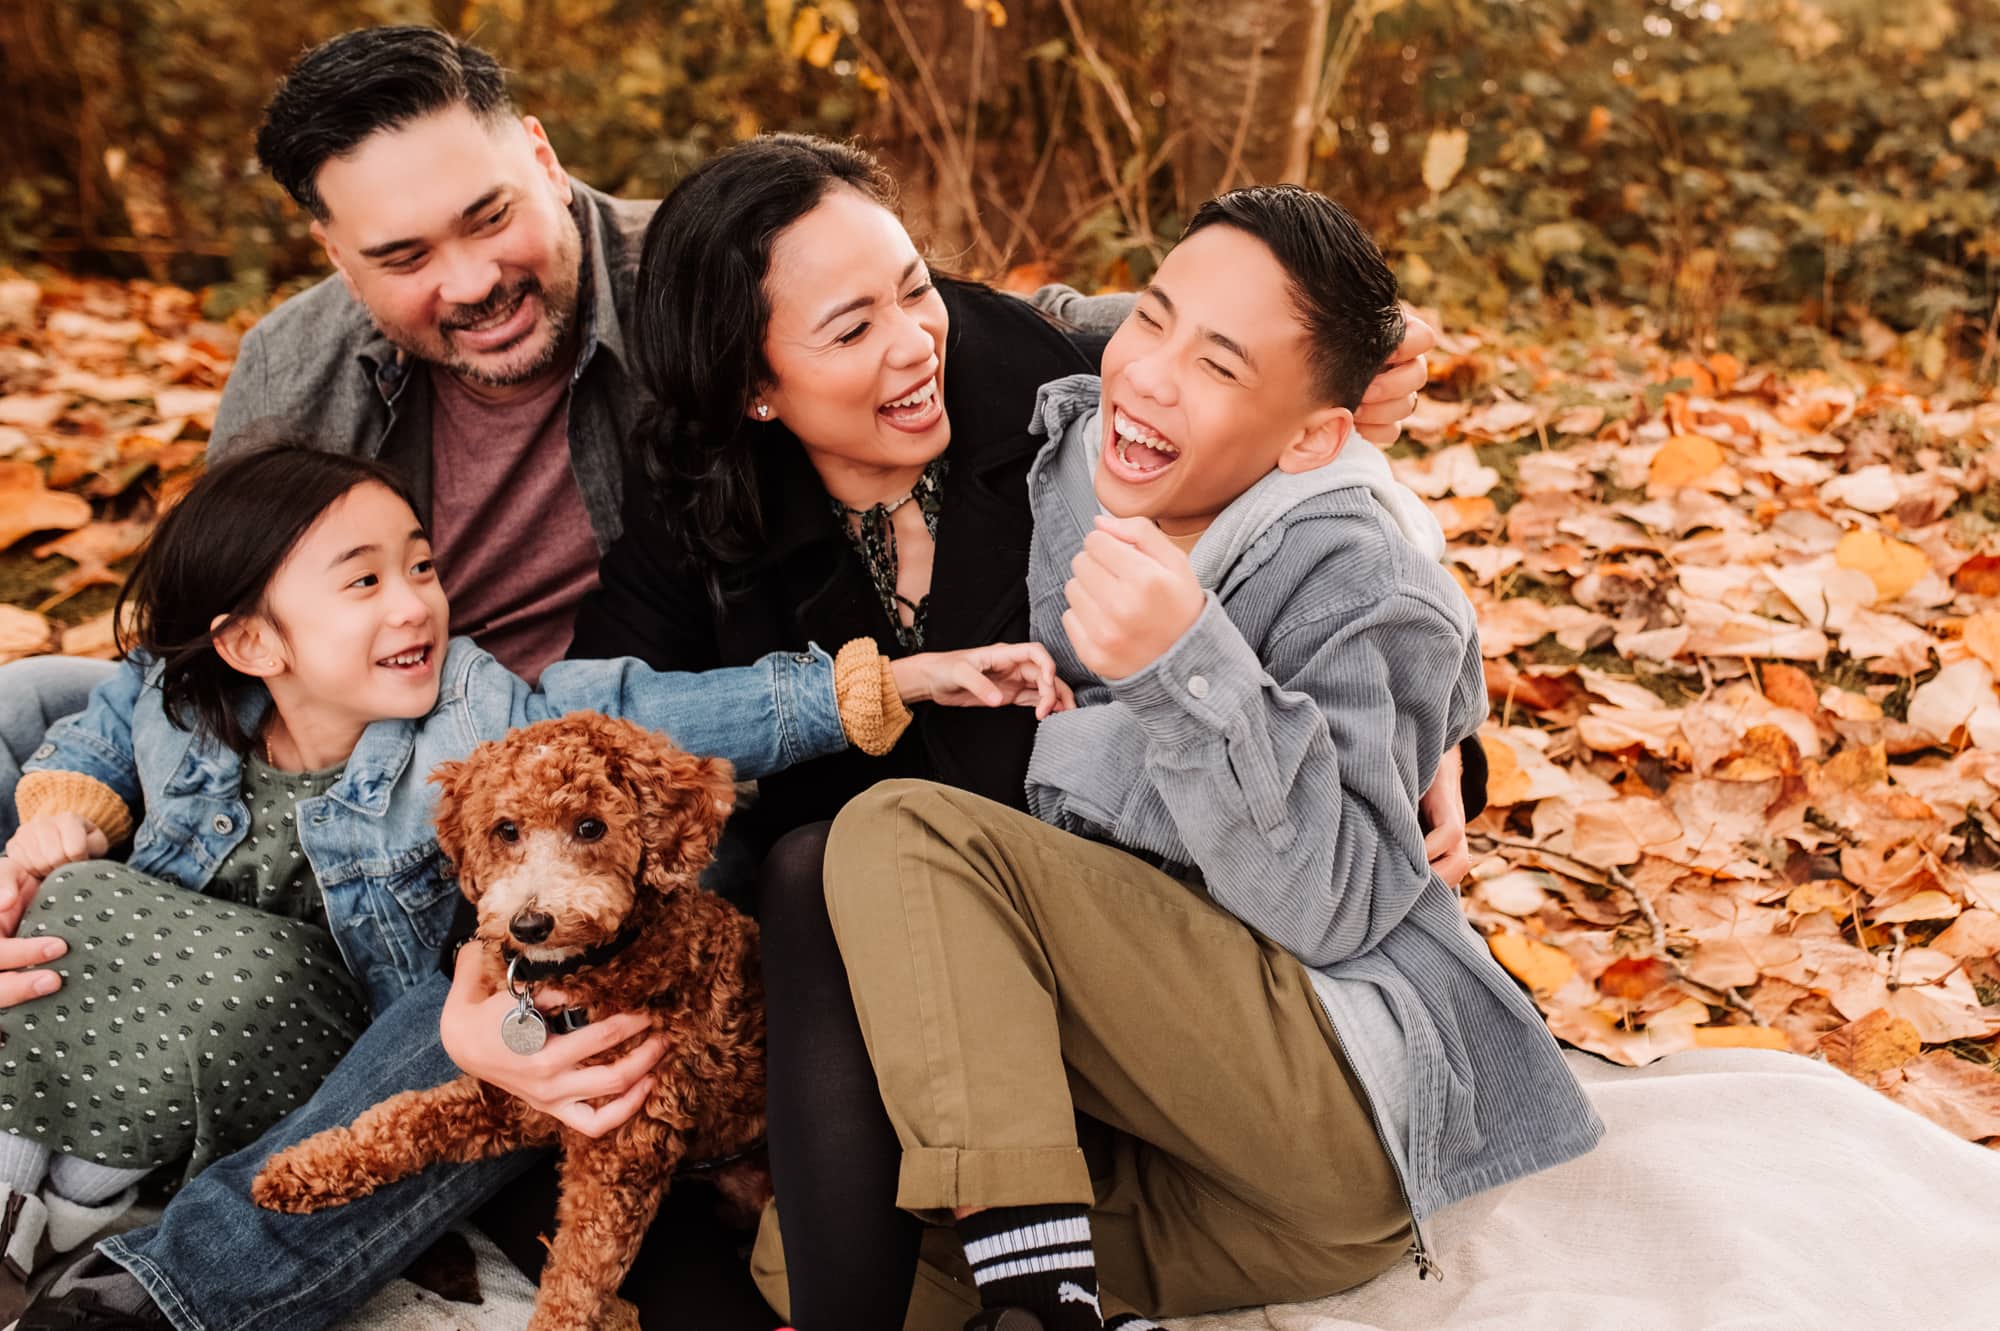 Teenage boy laughs as he is being tickled by his Pitt Meadows family during a fall family photo shoot.